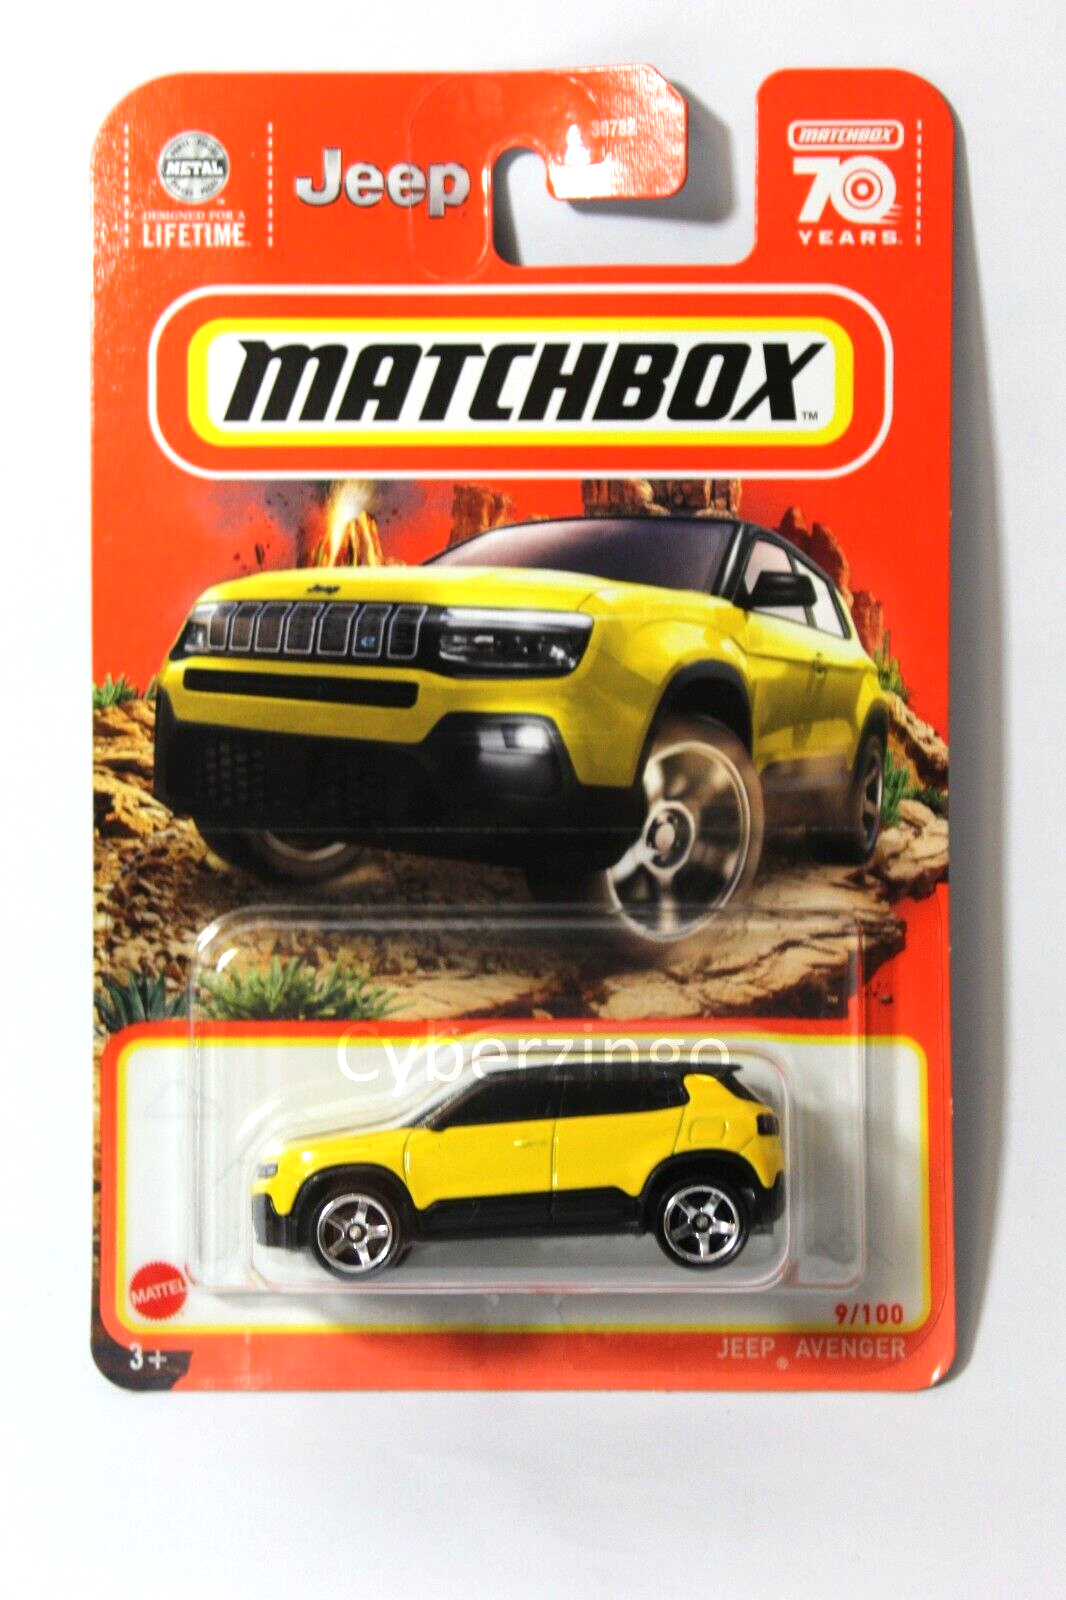 Primary image for Matchbox 1/64 20 Jeep Avenger Diecast Model Car NEW IN PACKAGE